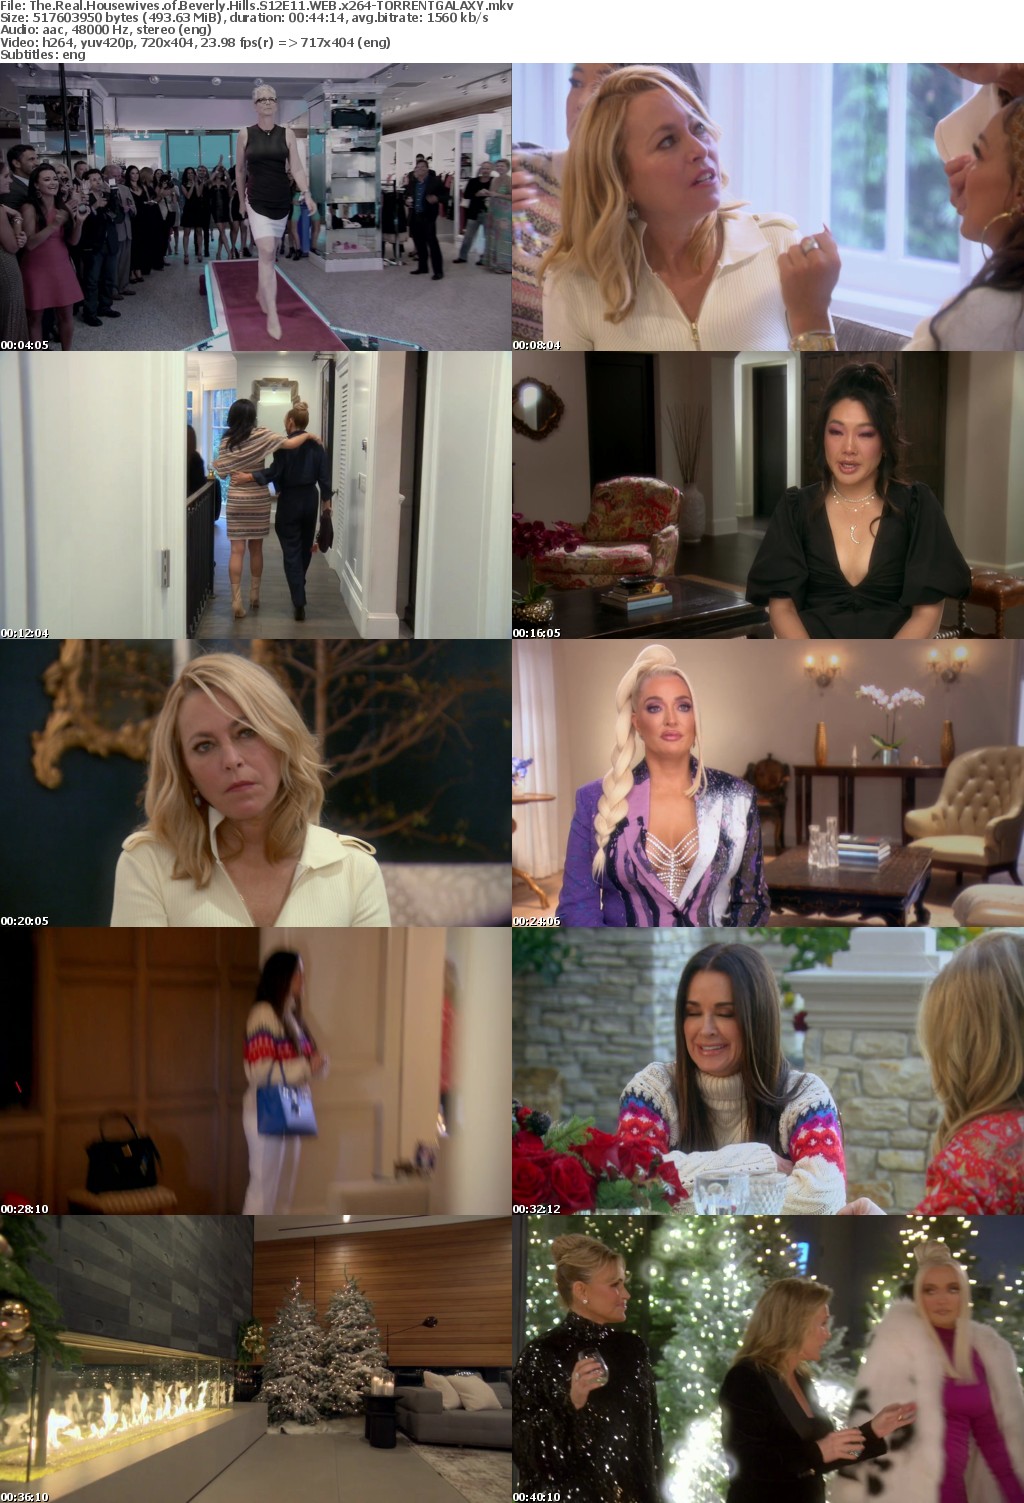 The Real Housewives of Beverly Hills S12E11 WEB x264-GALAXY